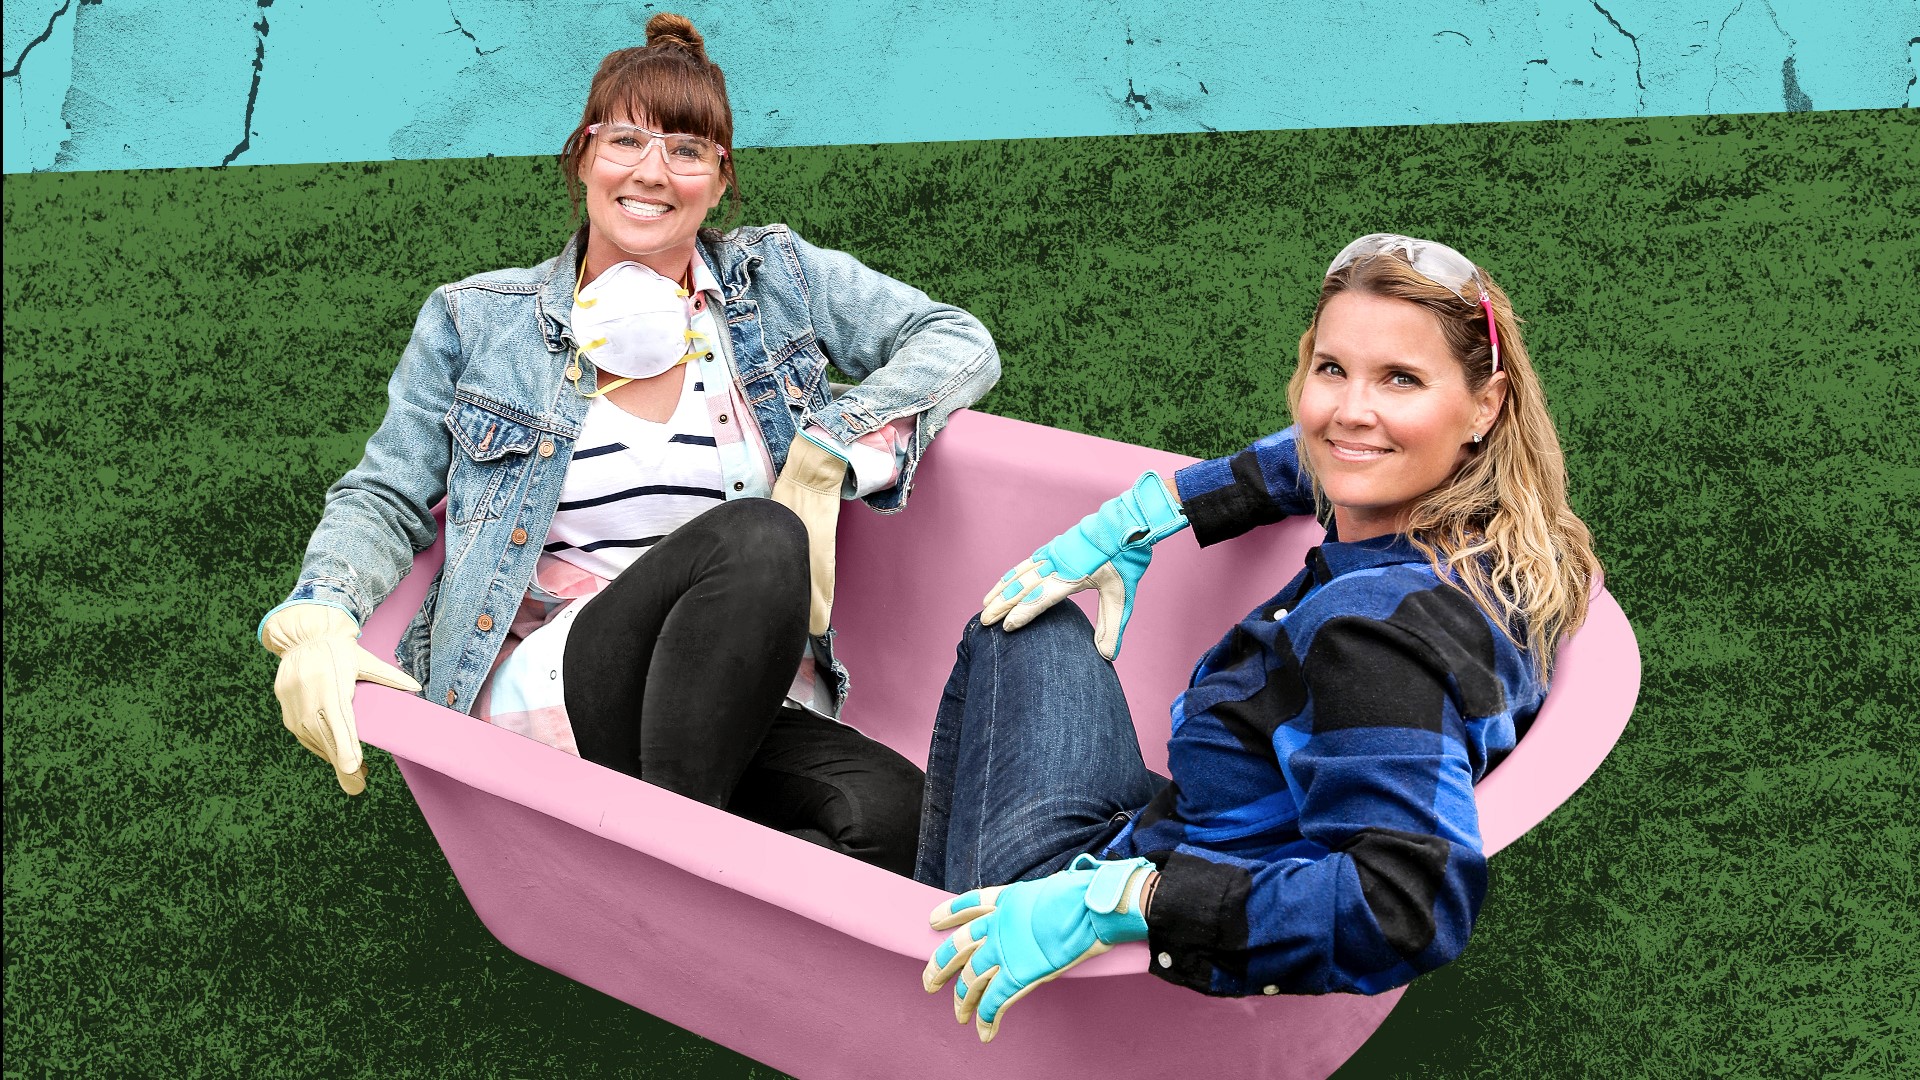 Snohomish County sisters bring laughs and knowledge to their new home renovation show.